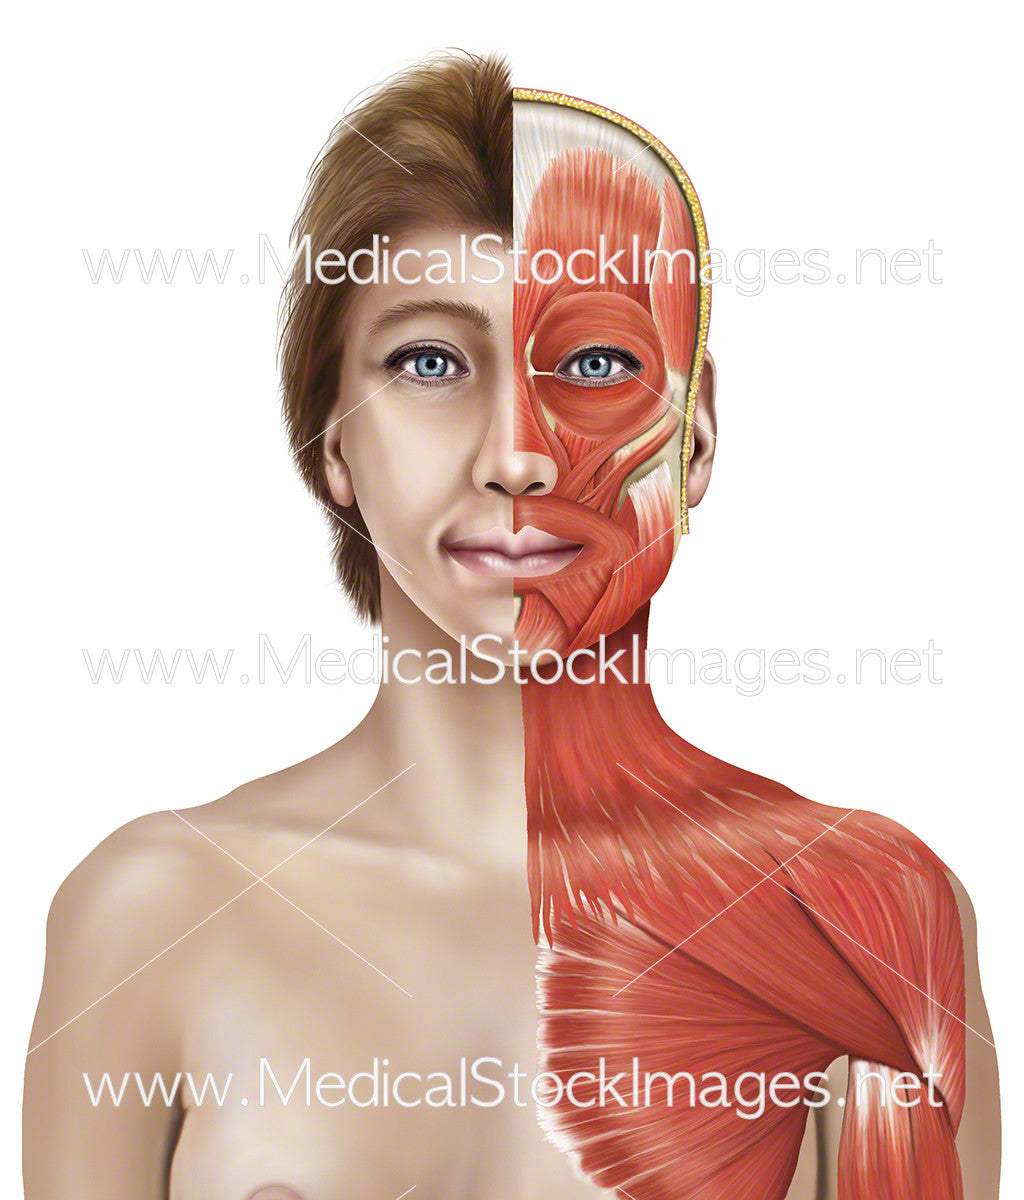 Female Figure with Muscles of Head and Chest – Medical Stock Images Company